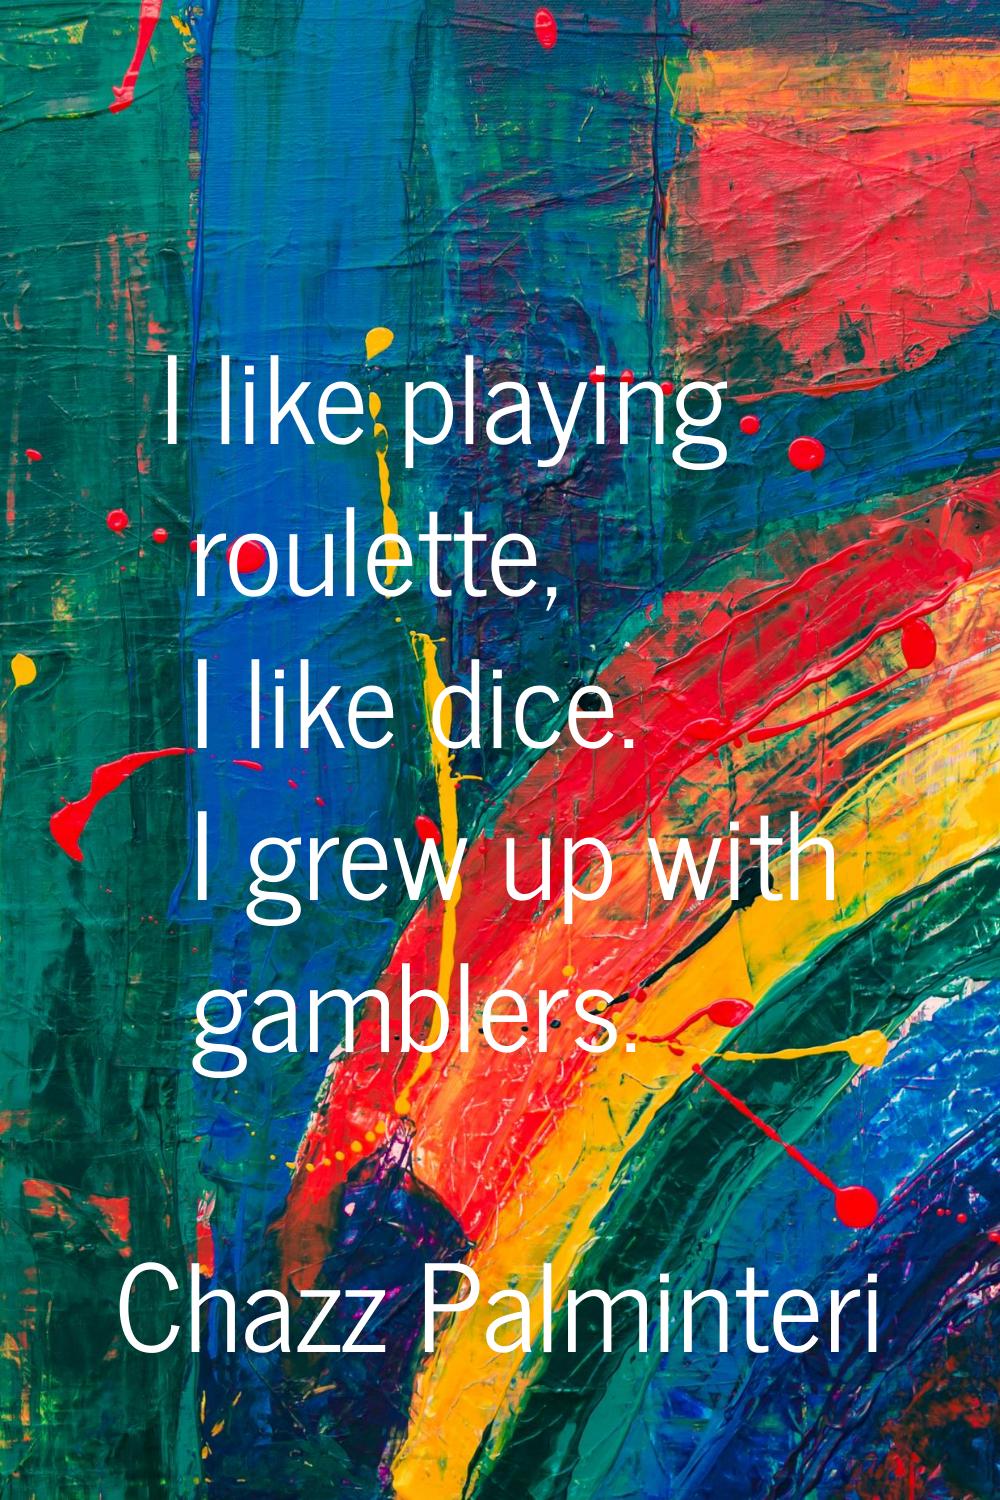 I like playing roulette, I like dice. I grew up with gamblers.